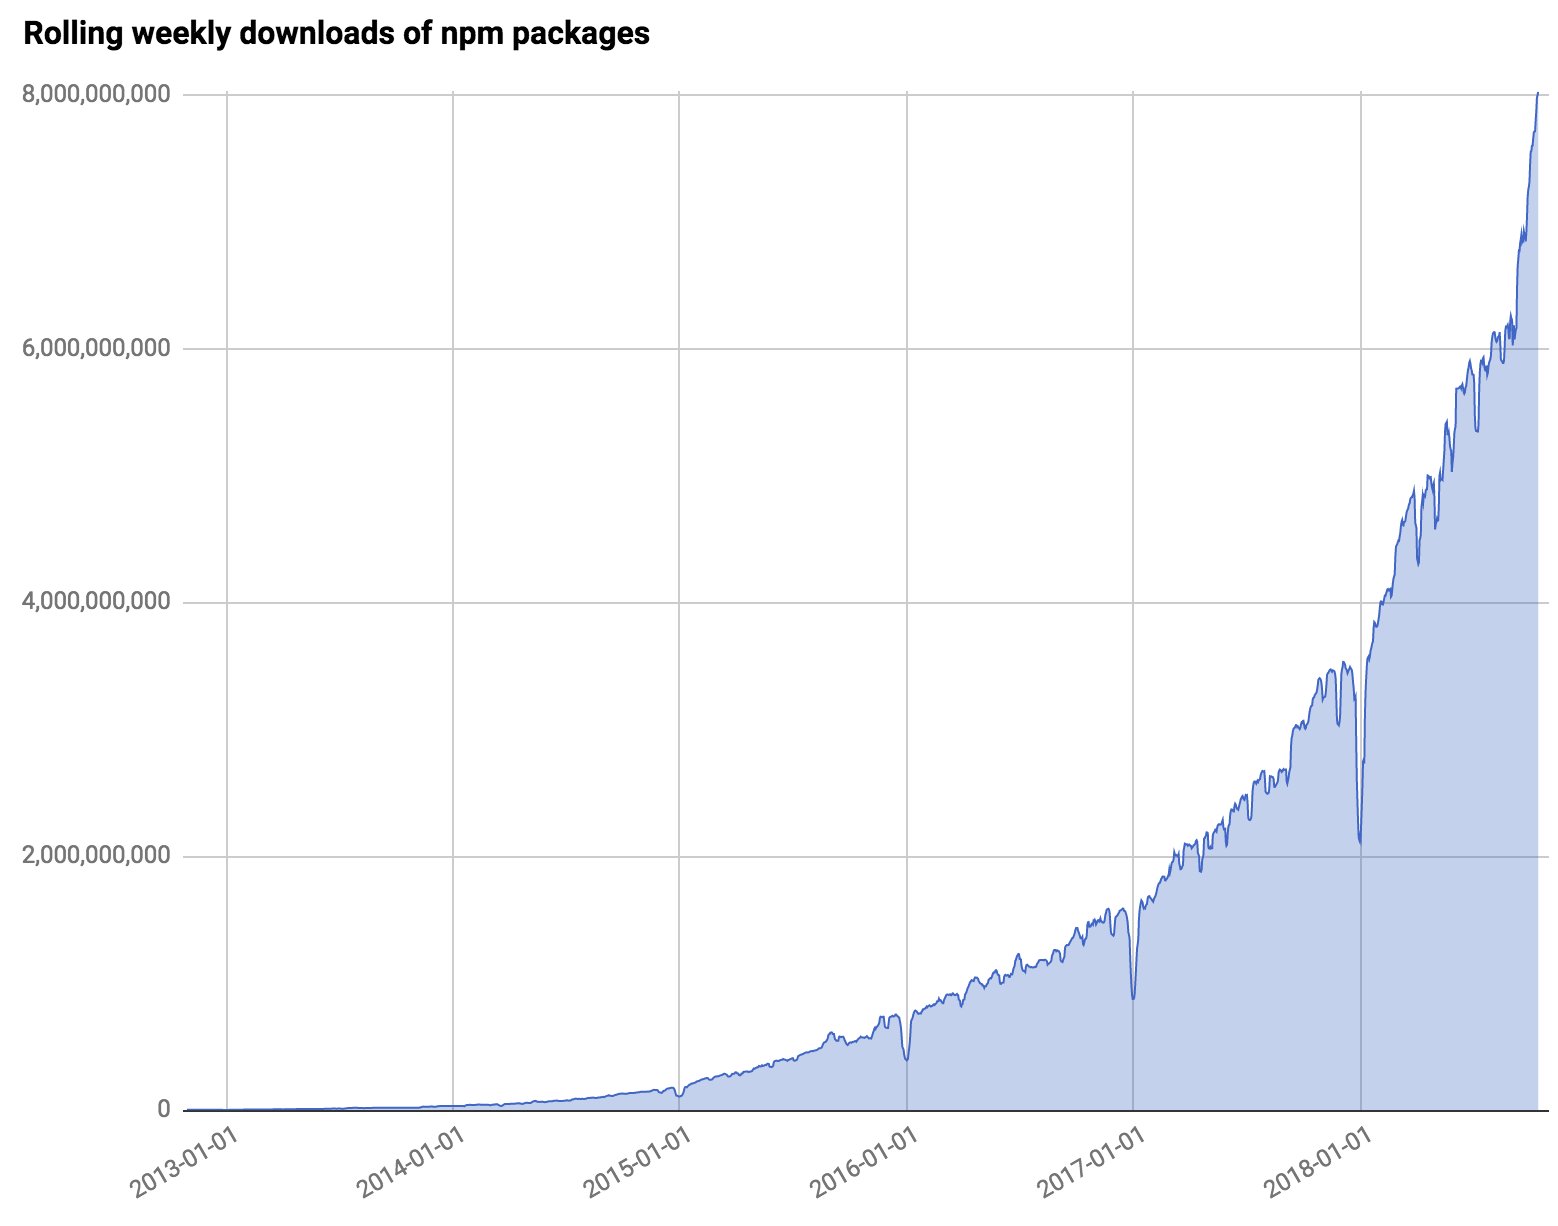 NPM package download stats. They are now at over 8 billion per week